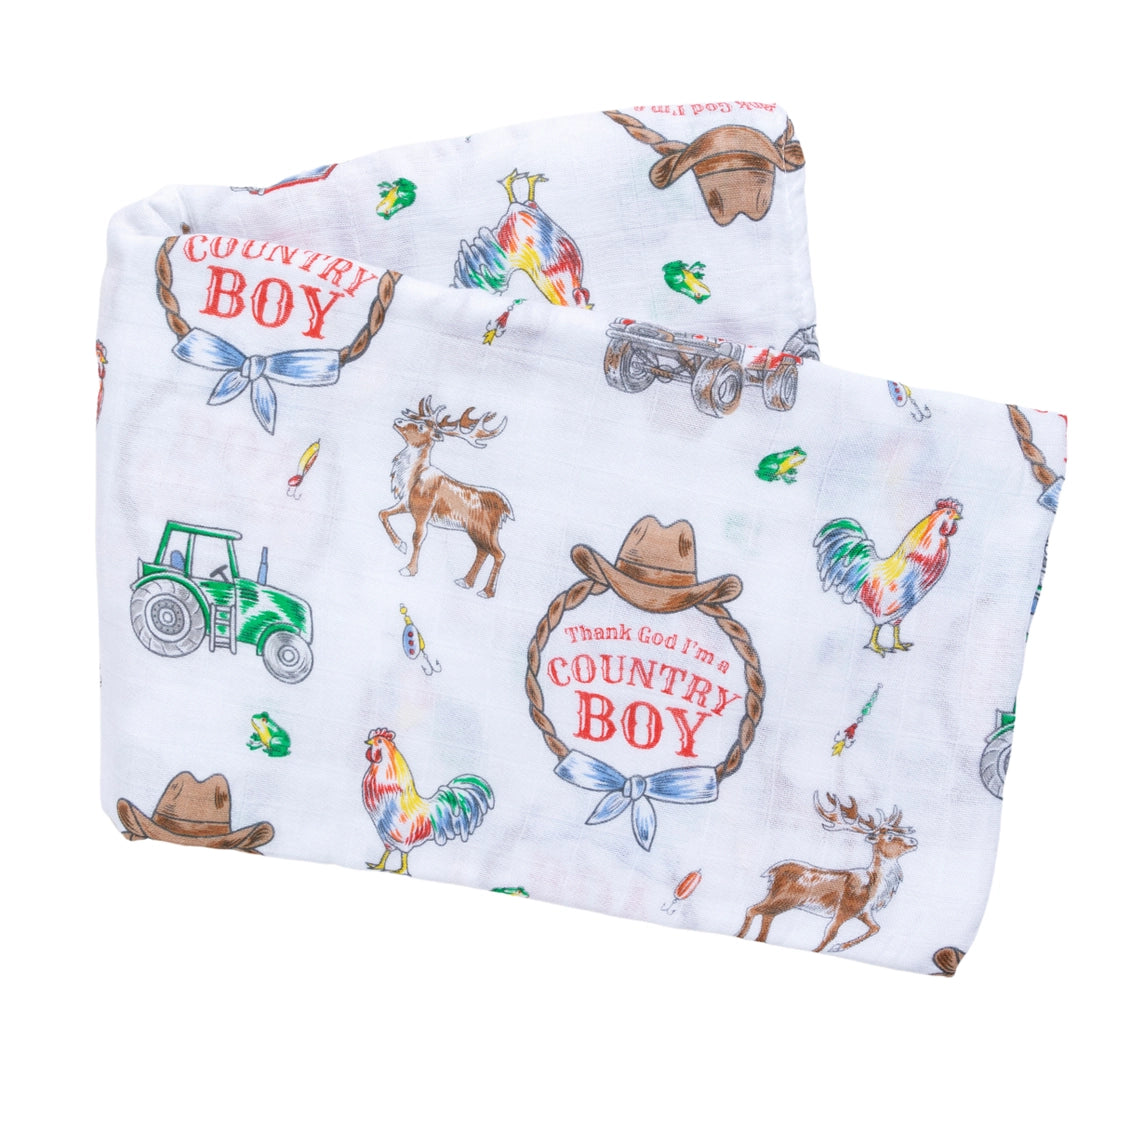 Country Boy Themed Swaddle Blanket